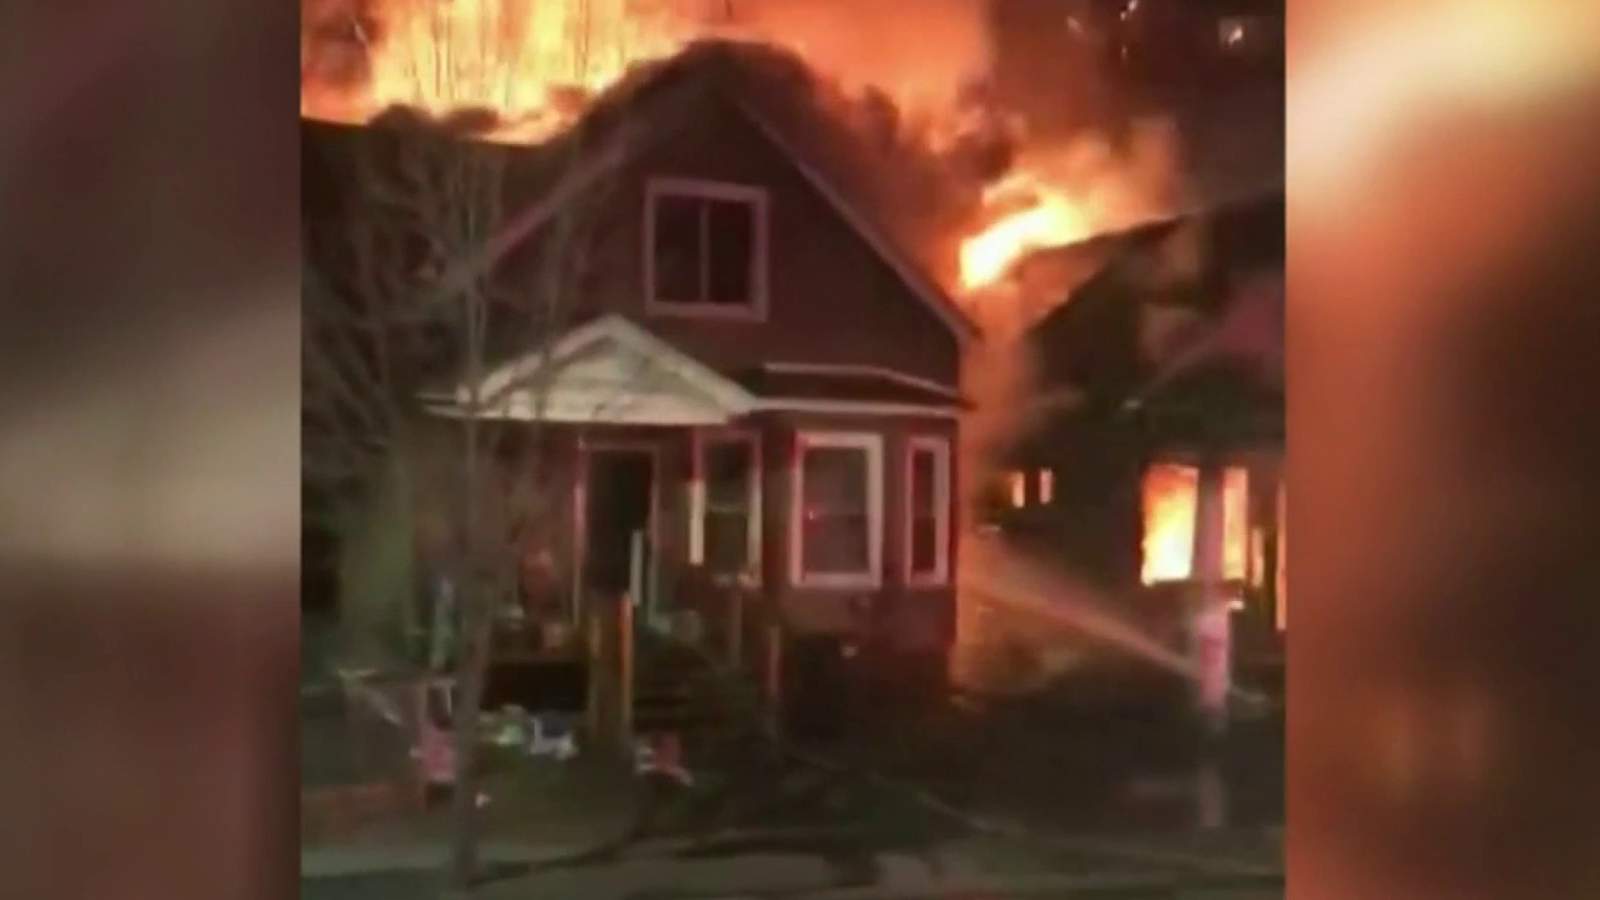 Family’s Detroit home destroyed in fire intentionally set next door